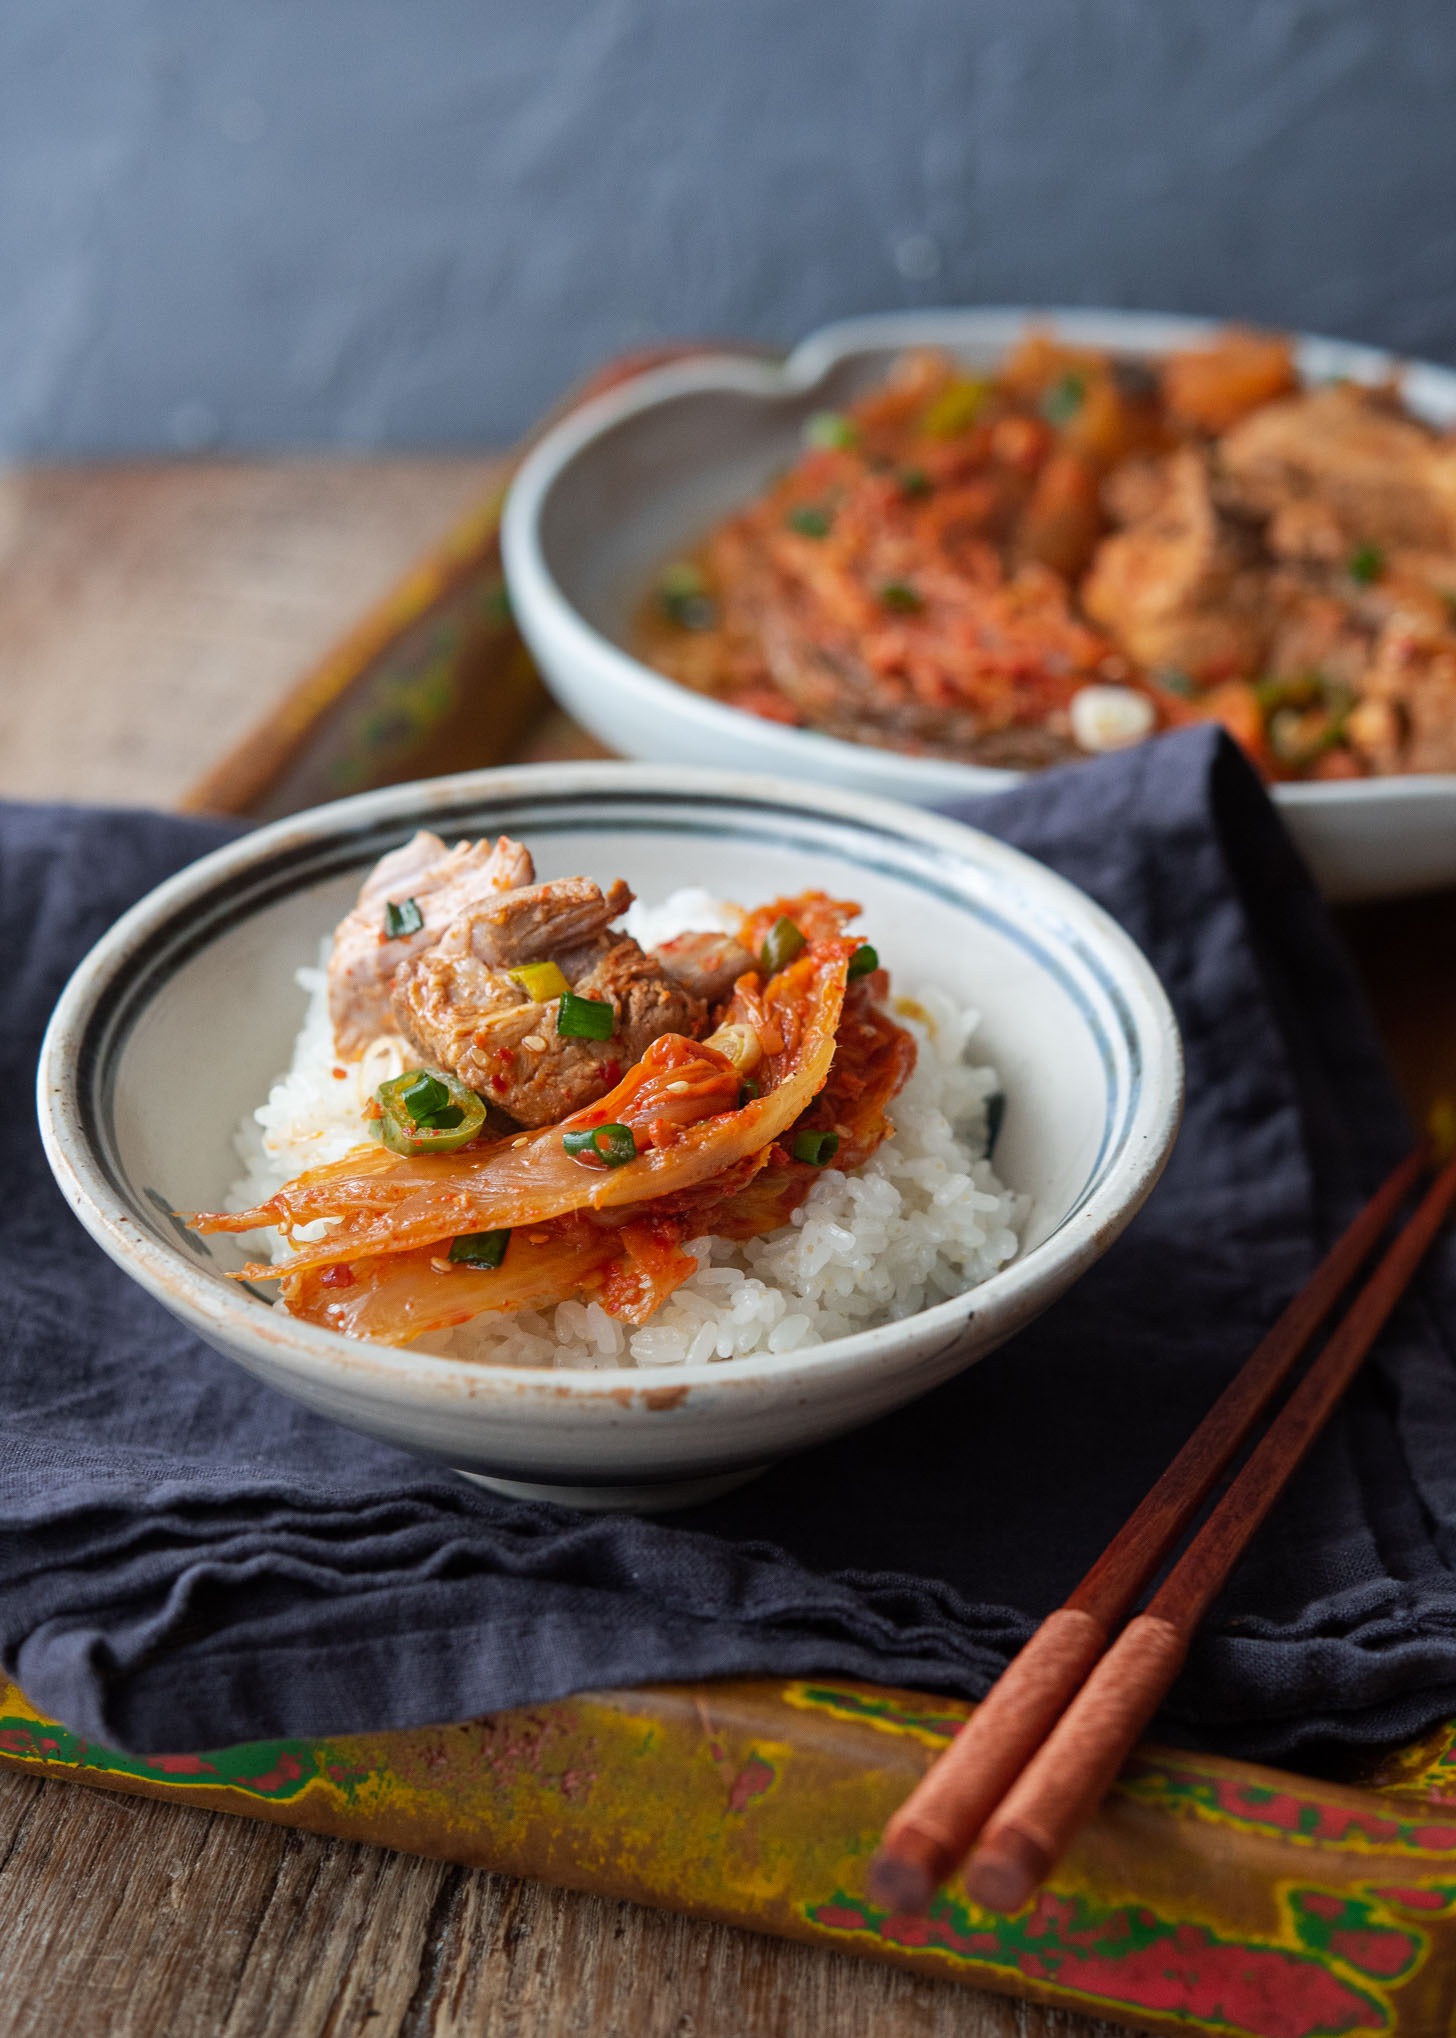 A bowl of rice topped with pieces of braised kimchi jjim and a pork rib.